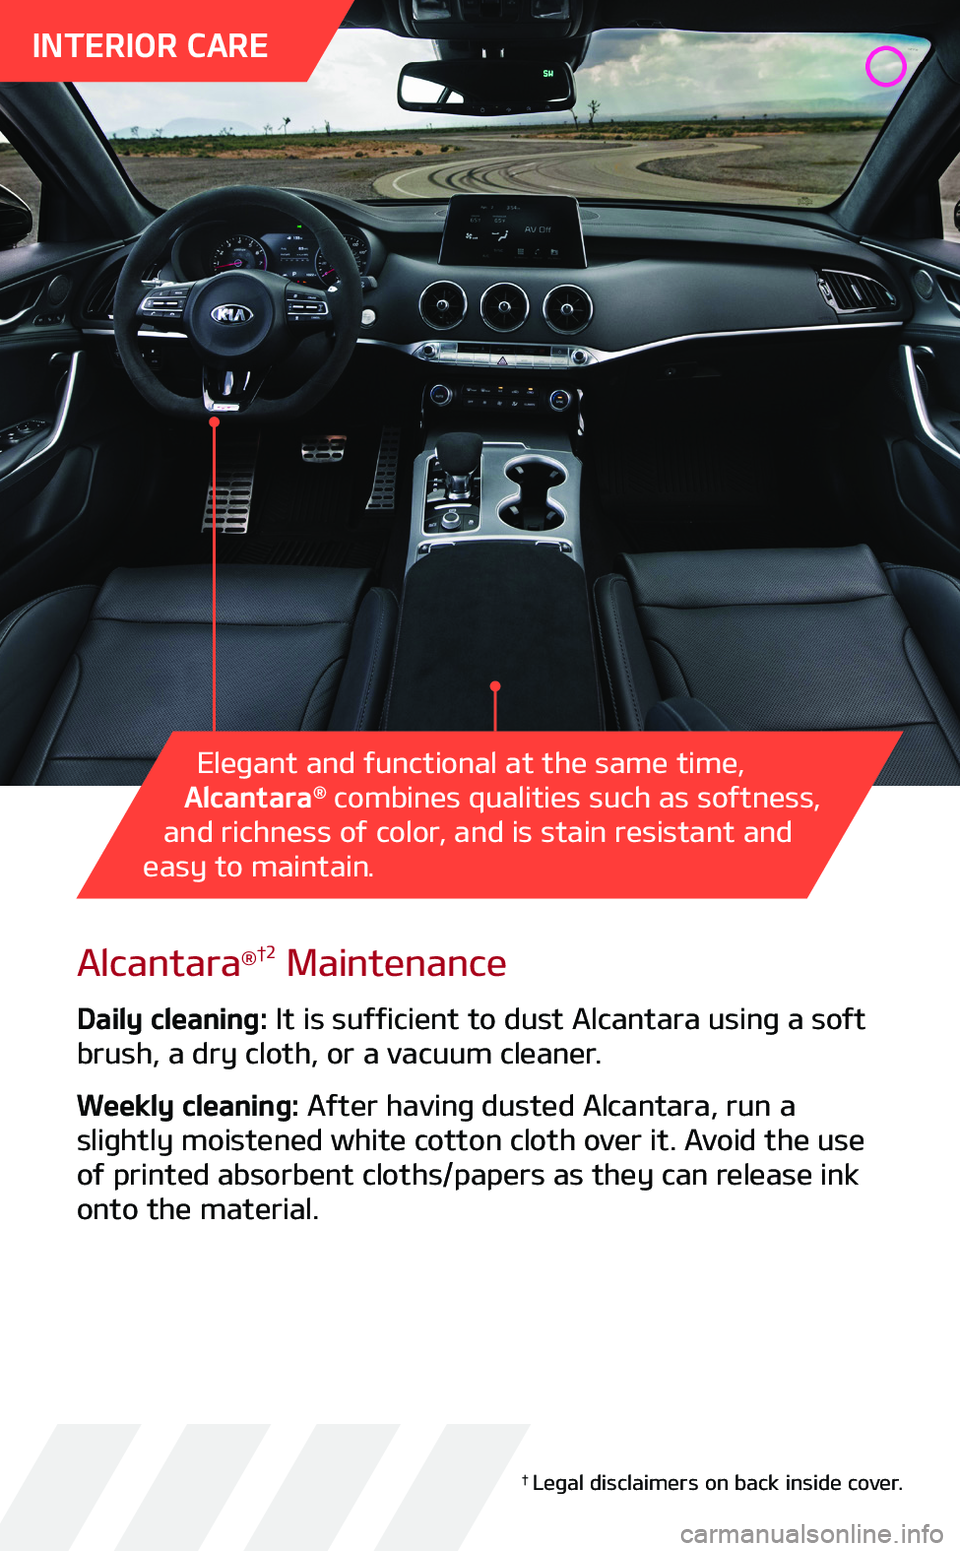 KIA STINGER 2019  Performance Features Alcantara®†2 Maintenance
Daily cleaning: It is sufficient to dust Alcantara using a soft brush, a dry cloth, or a vacuum cleaner.
Weekly cleaning: After having dusted Alcantara, run a slightly mois